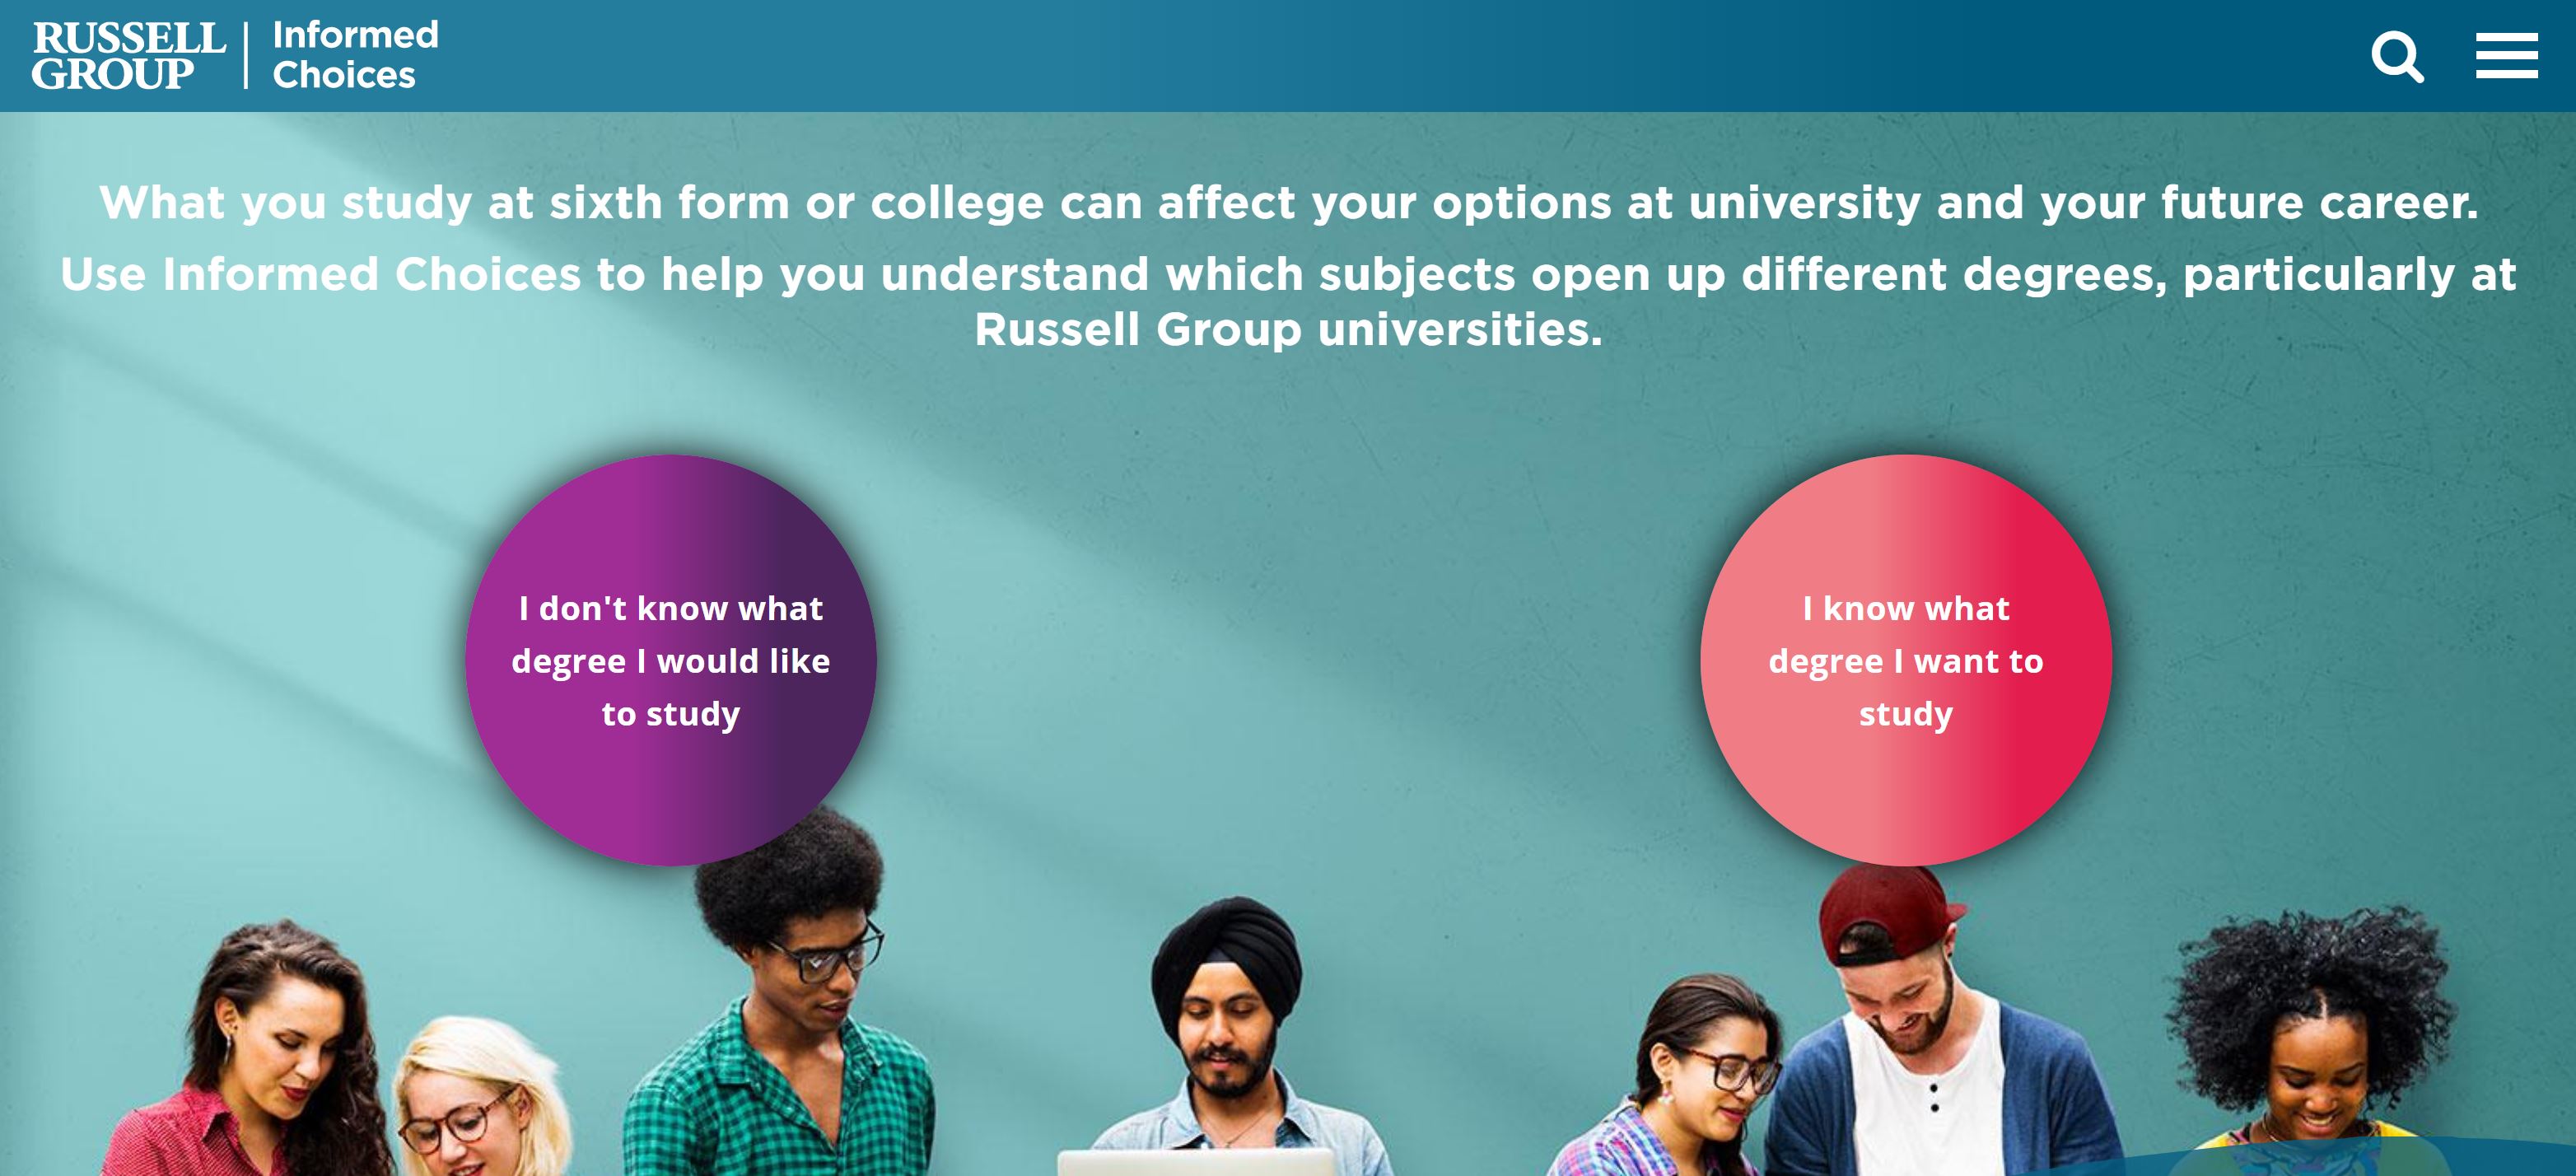 How Informed Choices can help support access to Russell Group universities